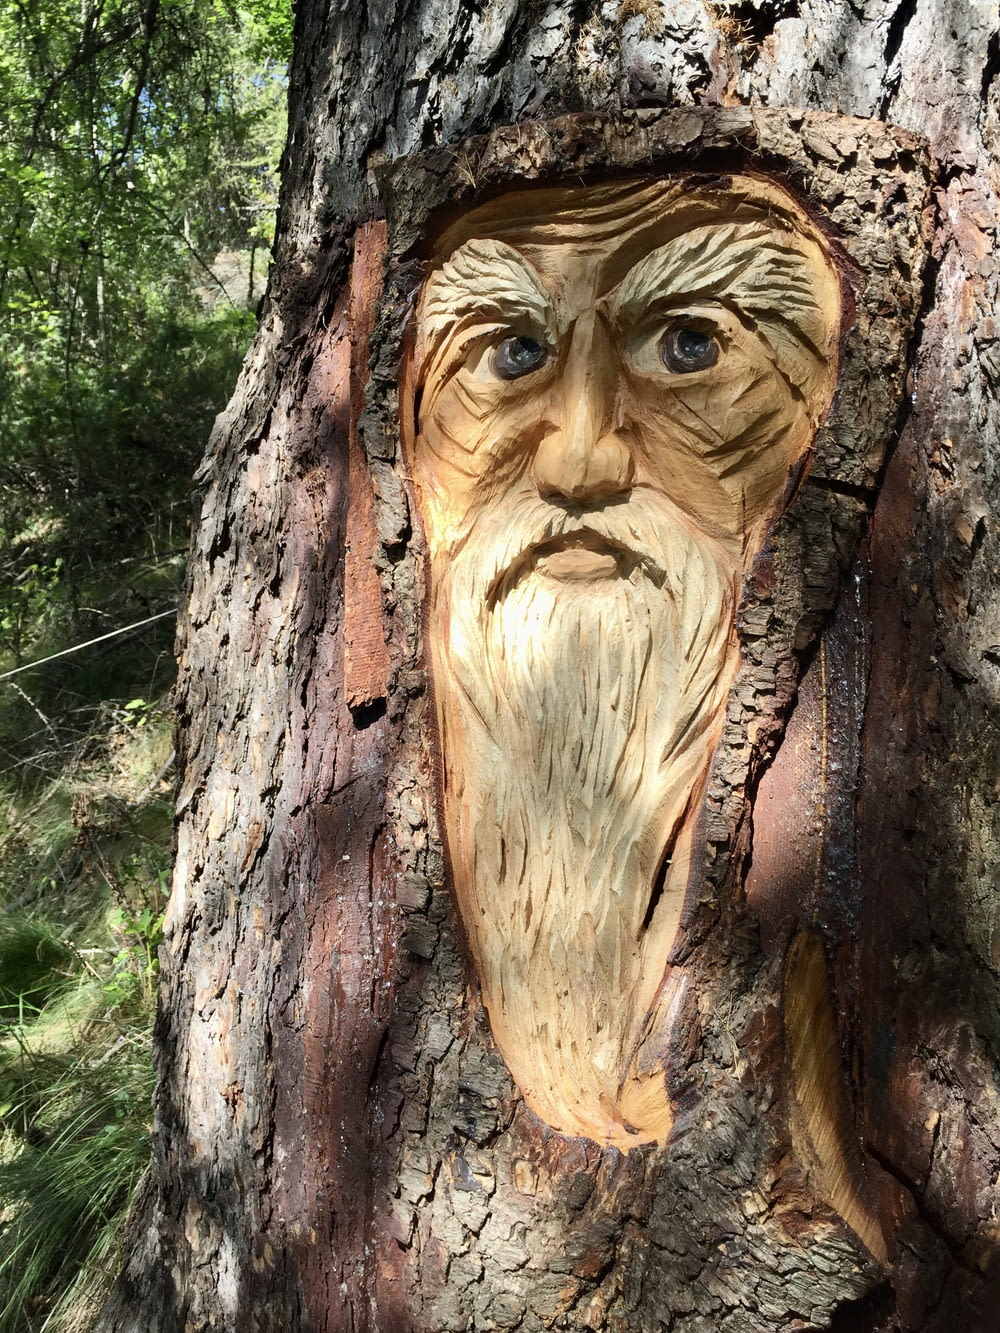 a carving of a man's face on a tree